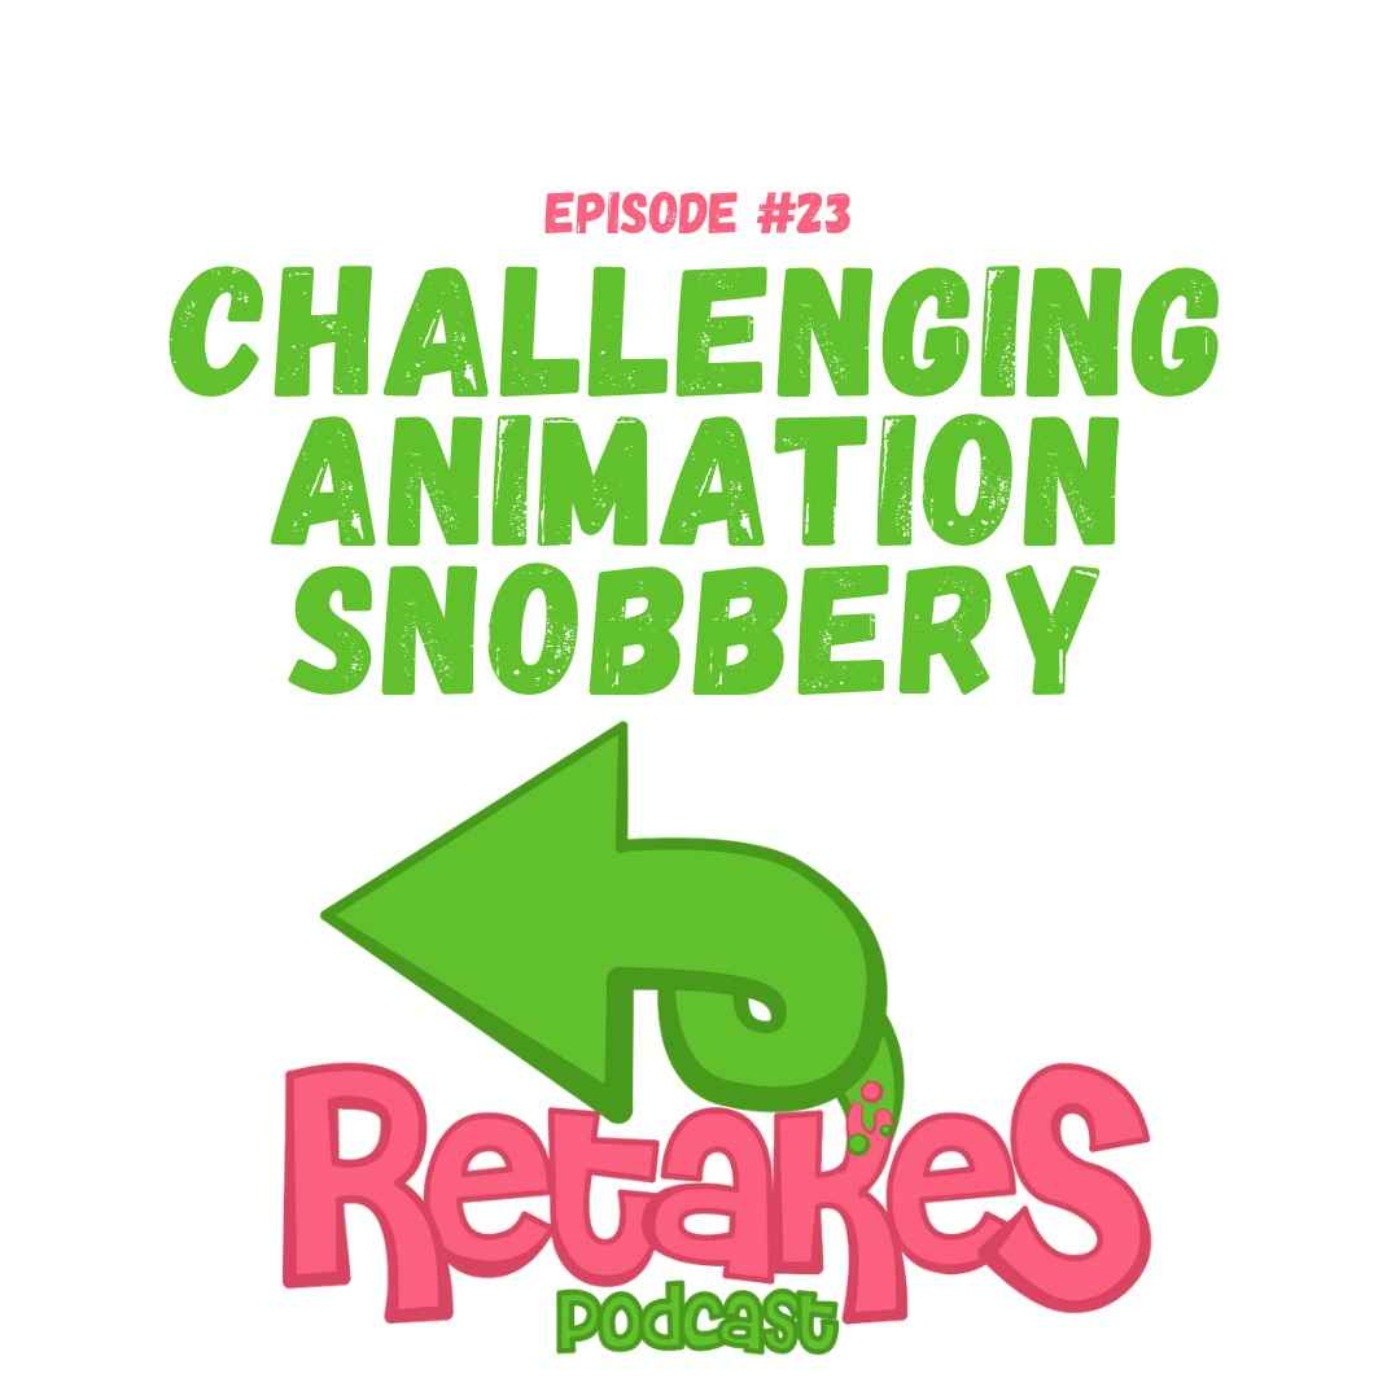 Challenging Animation Snobbery